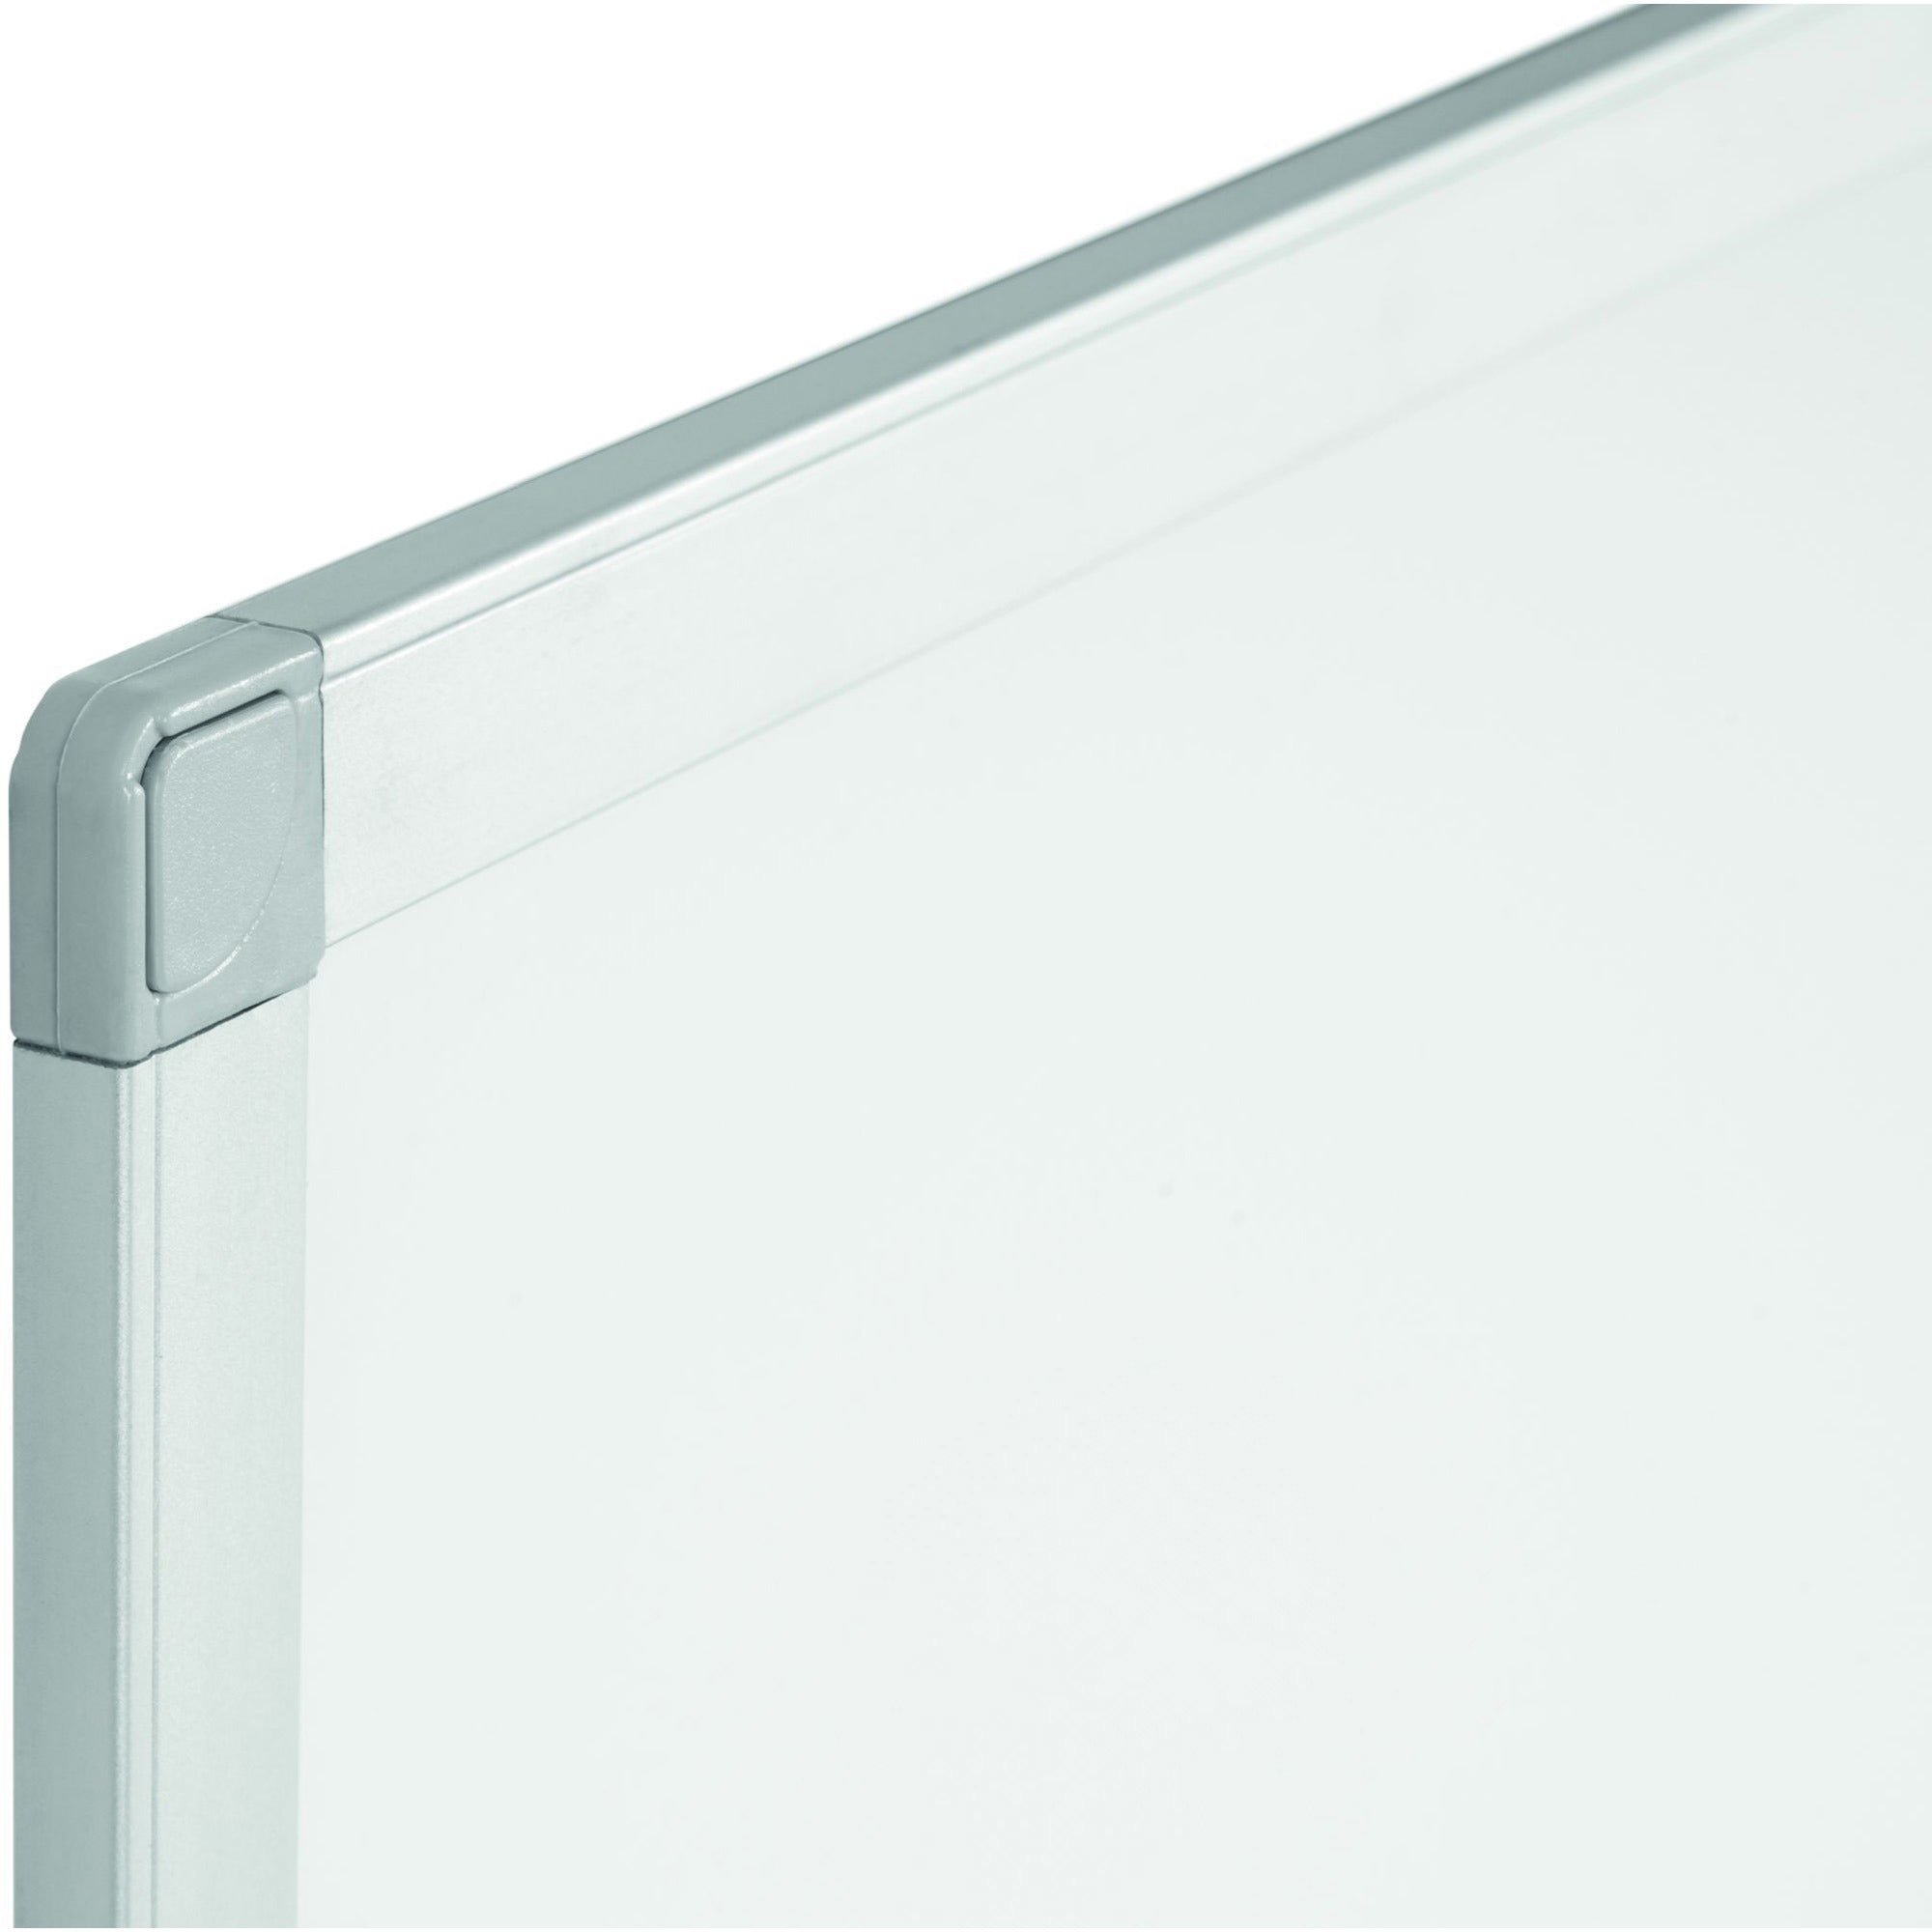 bi-silque-ayda-steel-dry-erase-board-48-4-ft-width-x-36-3-ft-height-white-steel-surface-aluminum-frame-rectangle-horizontal-vertical-magnetic-1-each_bvcma05759214 - 3